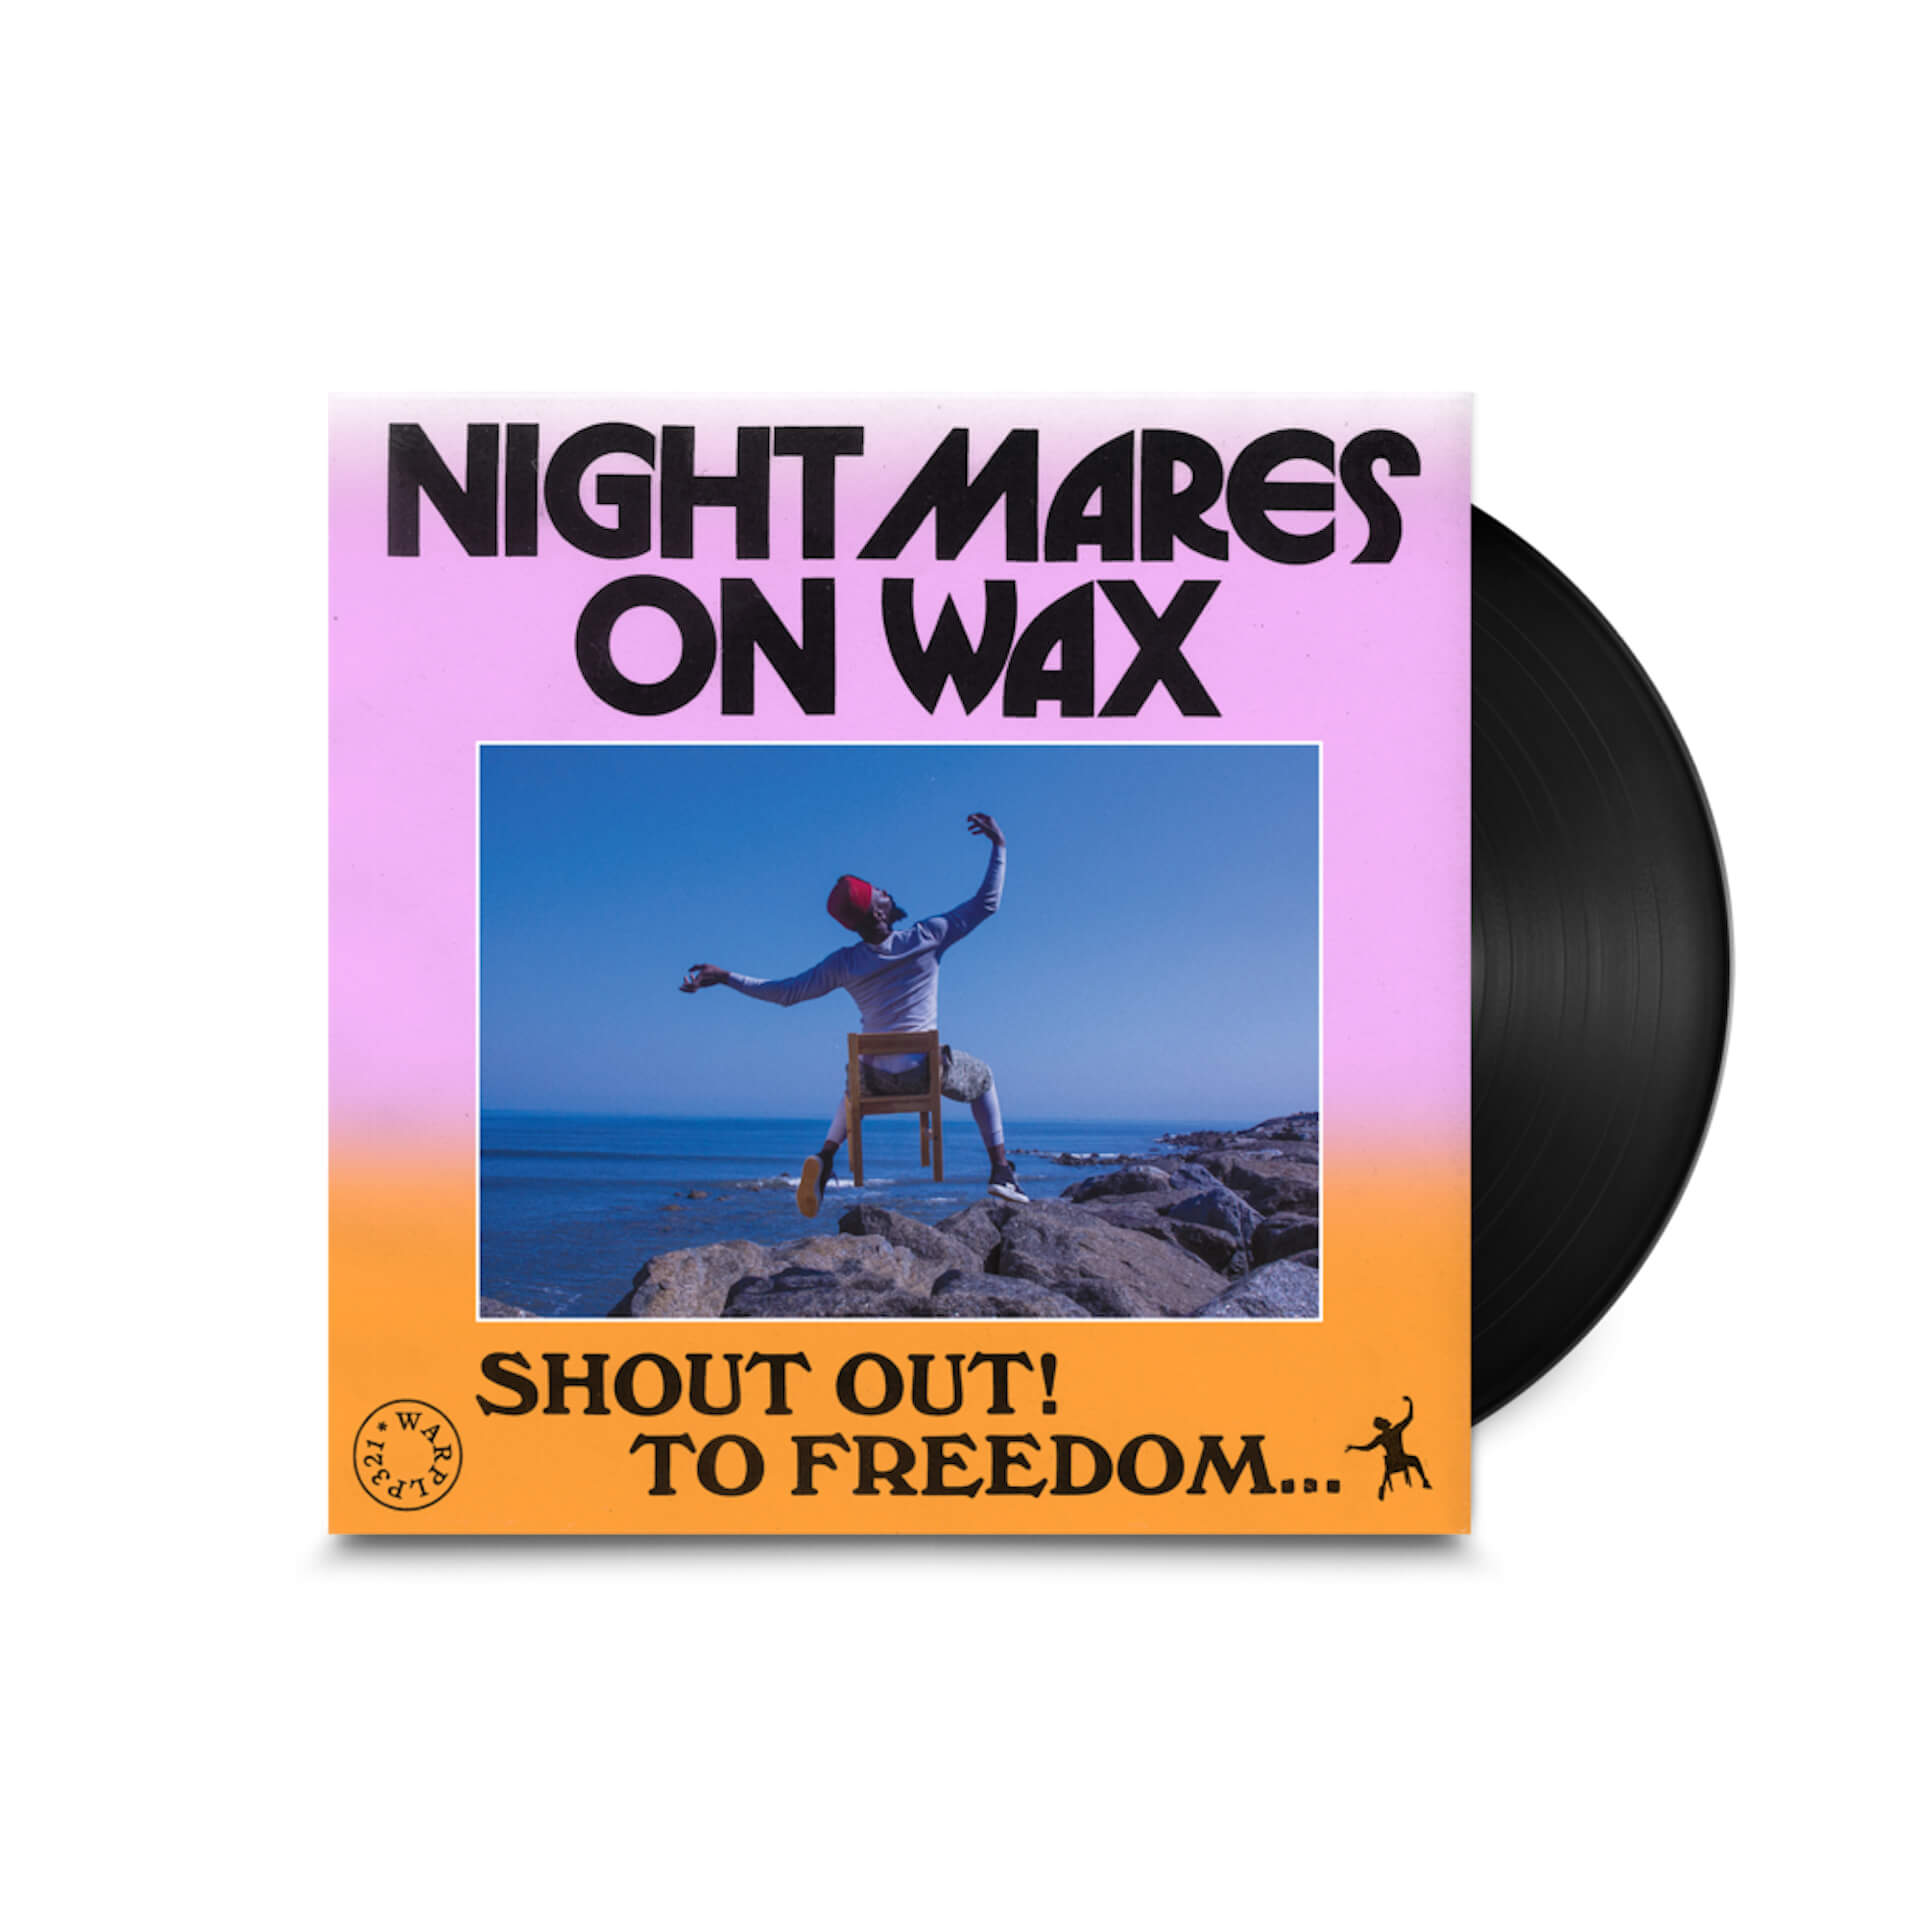 Nightmares On Waxの最新作『Shout Out！ To Freedom…』が本日リリース！収録曲7曲のパフォーマンス映像も解禁 music211029_nightmaresonwax_1